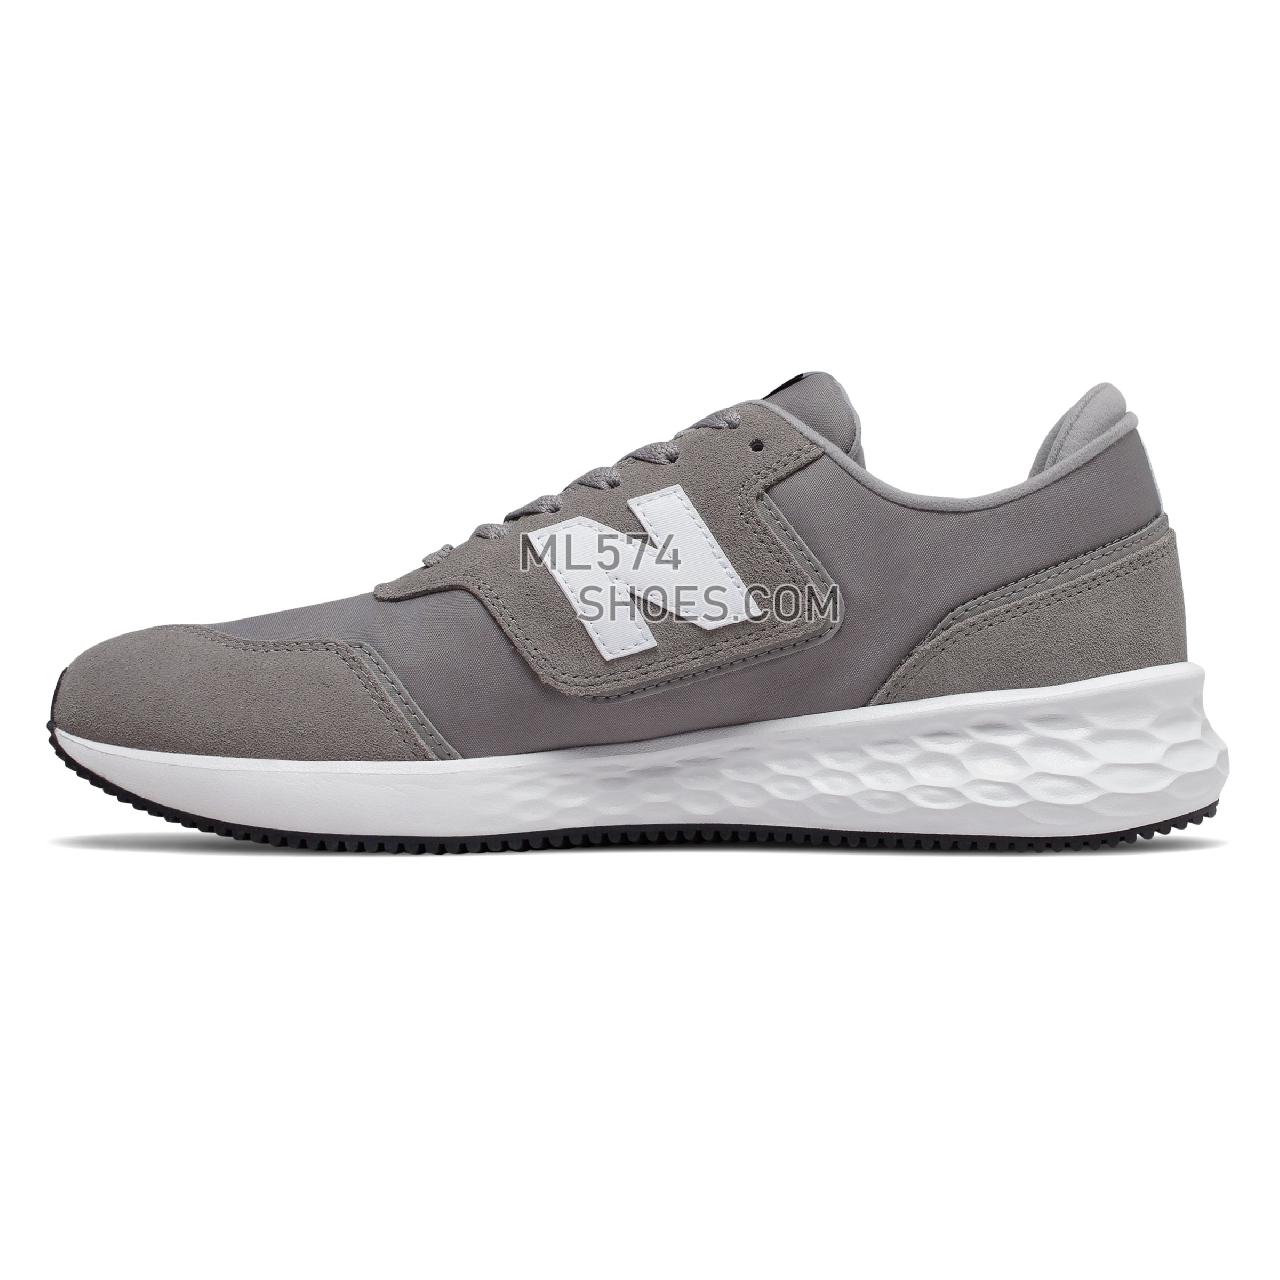 New Balance Fresh Foam X-70 - Men's Sport Style Sneakers - Marblehead with Munsell White - MSX70CA